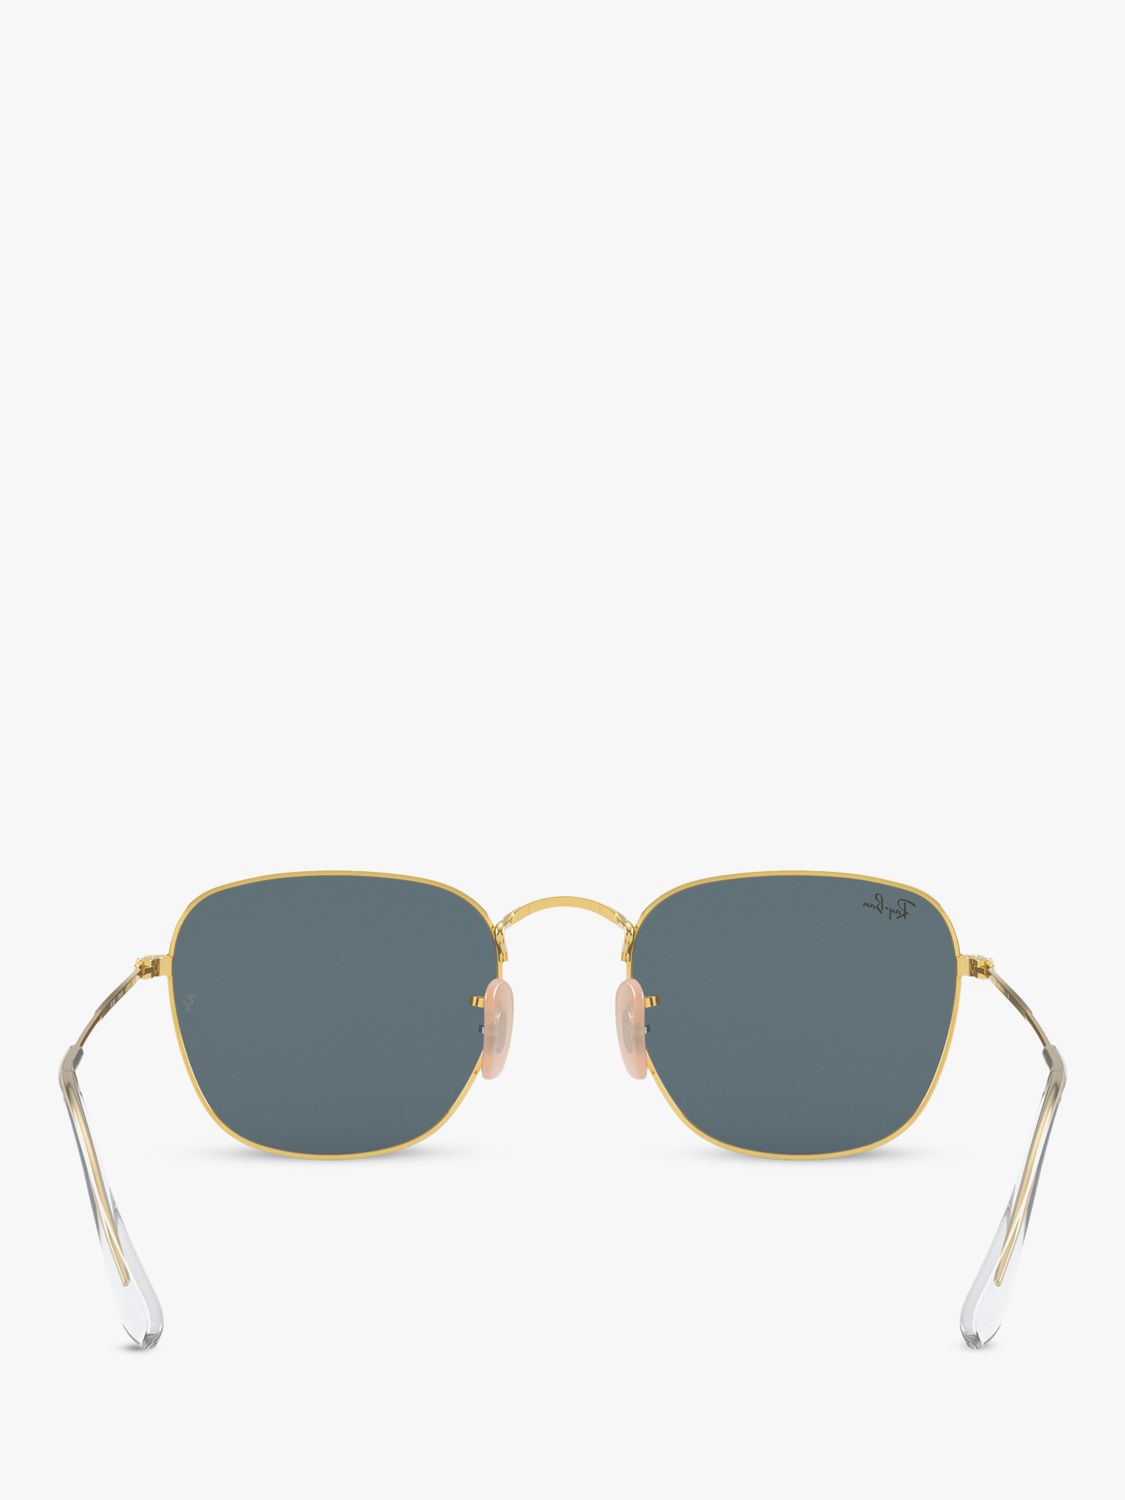 Buy Ray-Ban RB3857 Frank Unisex Square Sunglasses Online at johnlewis.com